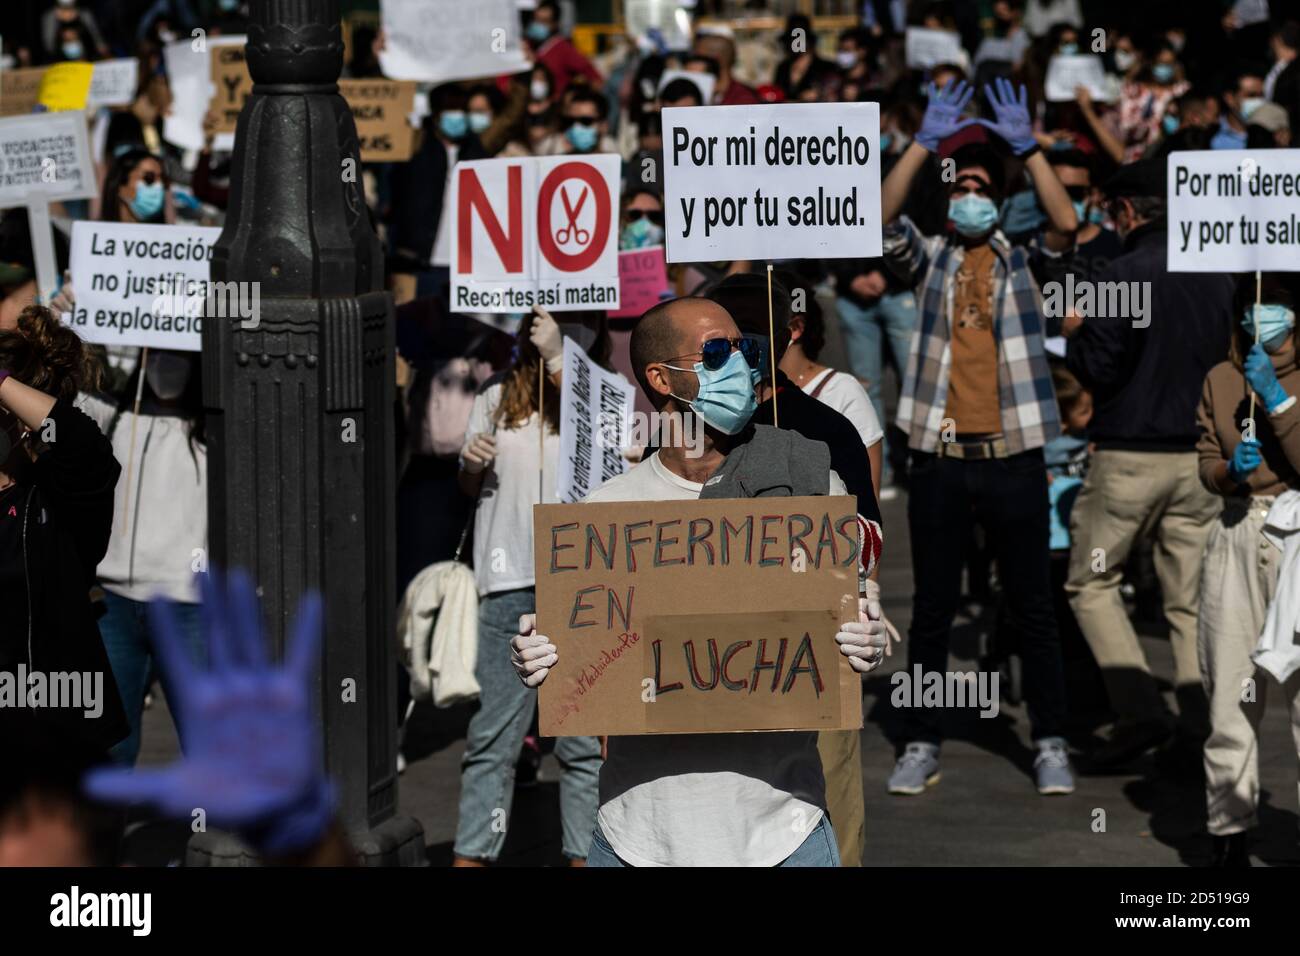 Madrid, Spain. 12th Oct, 2020. Nurses with placards during a protest in Sol Square. Nurses are demanding better working conditions and protesting against the management of the coronavirus crisis in the public health care system. Credit: Marcos del Mazo/Alamy Live News Stock Photo